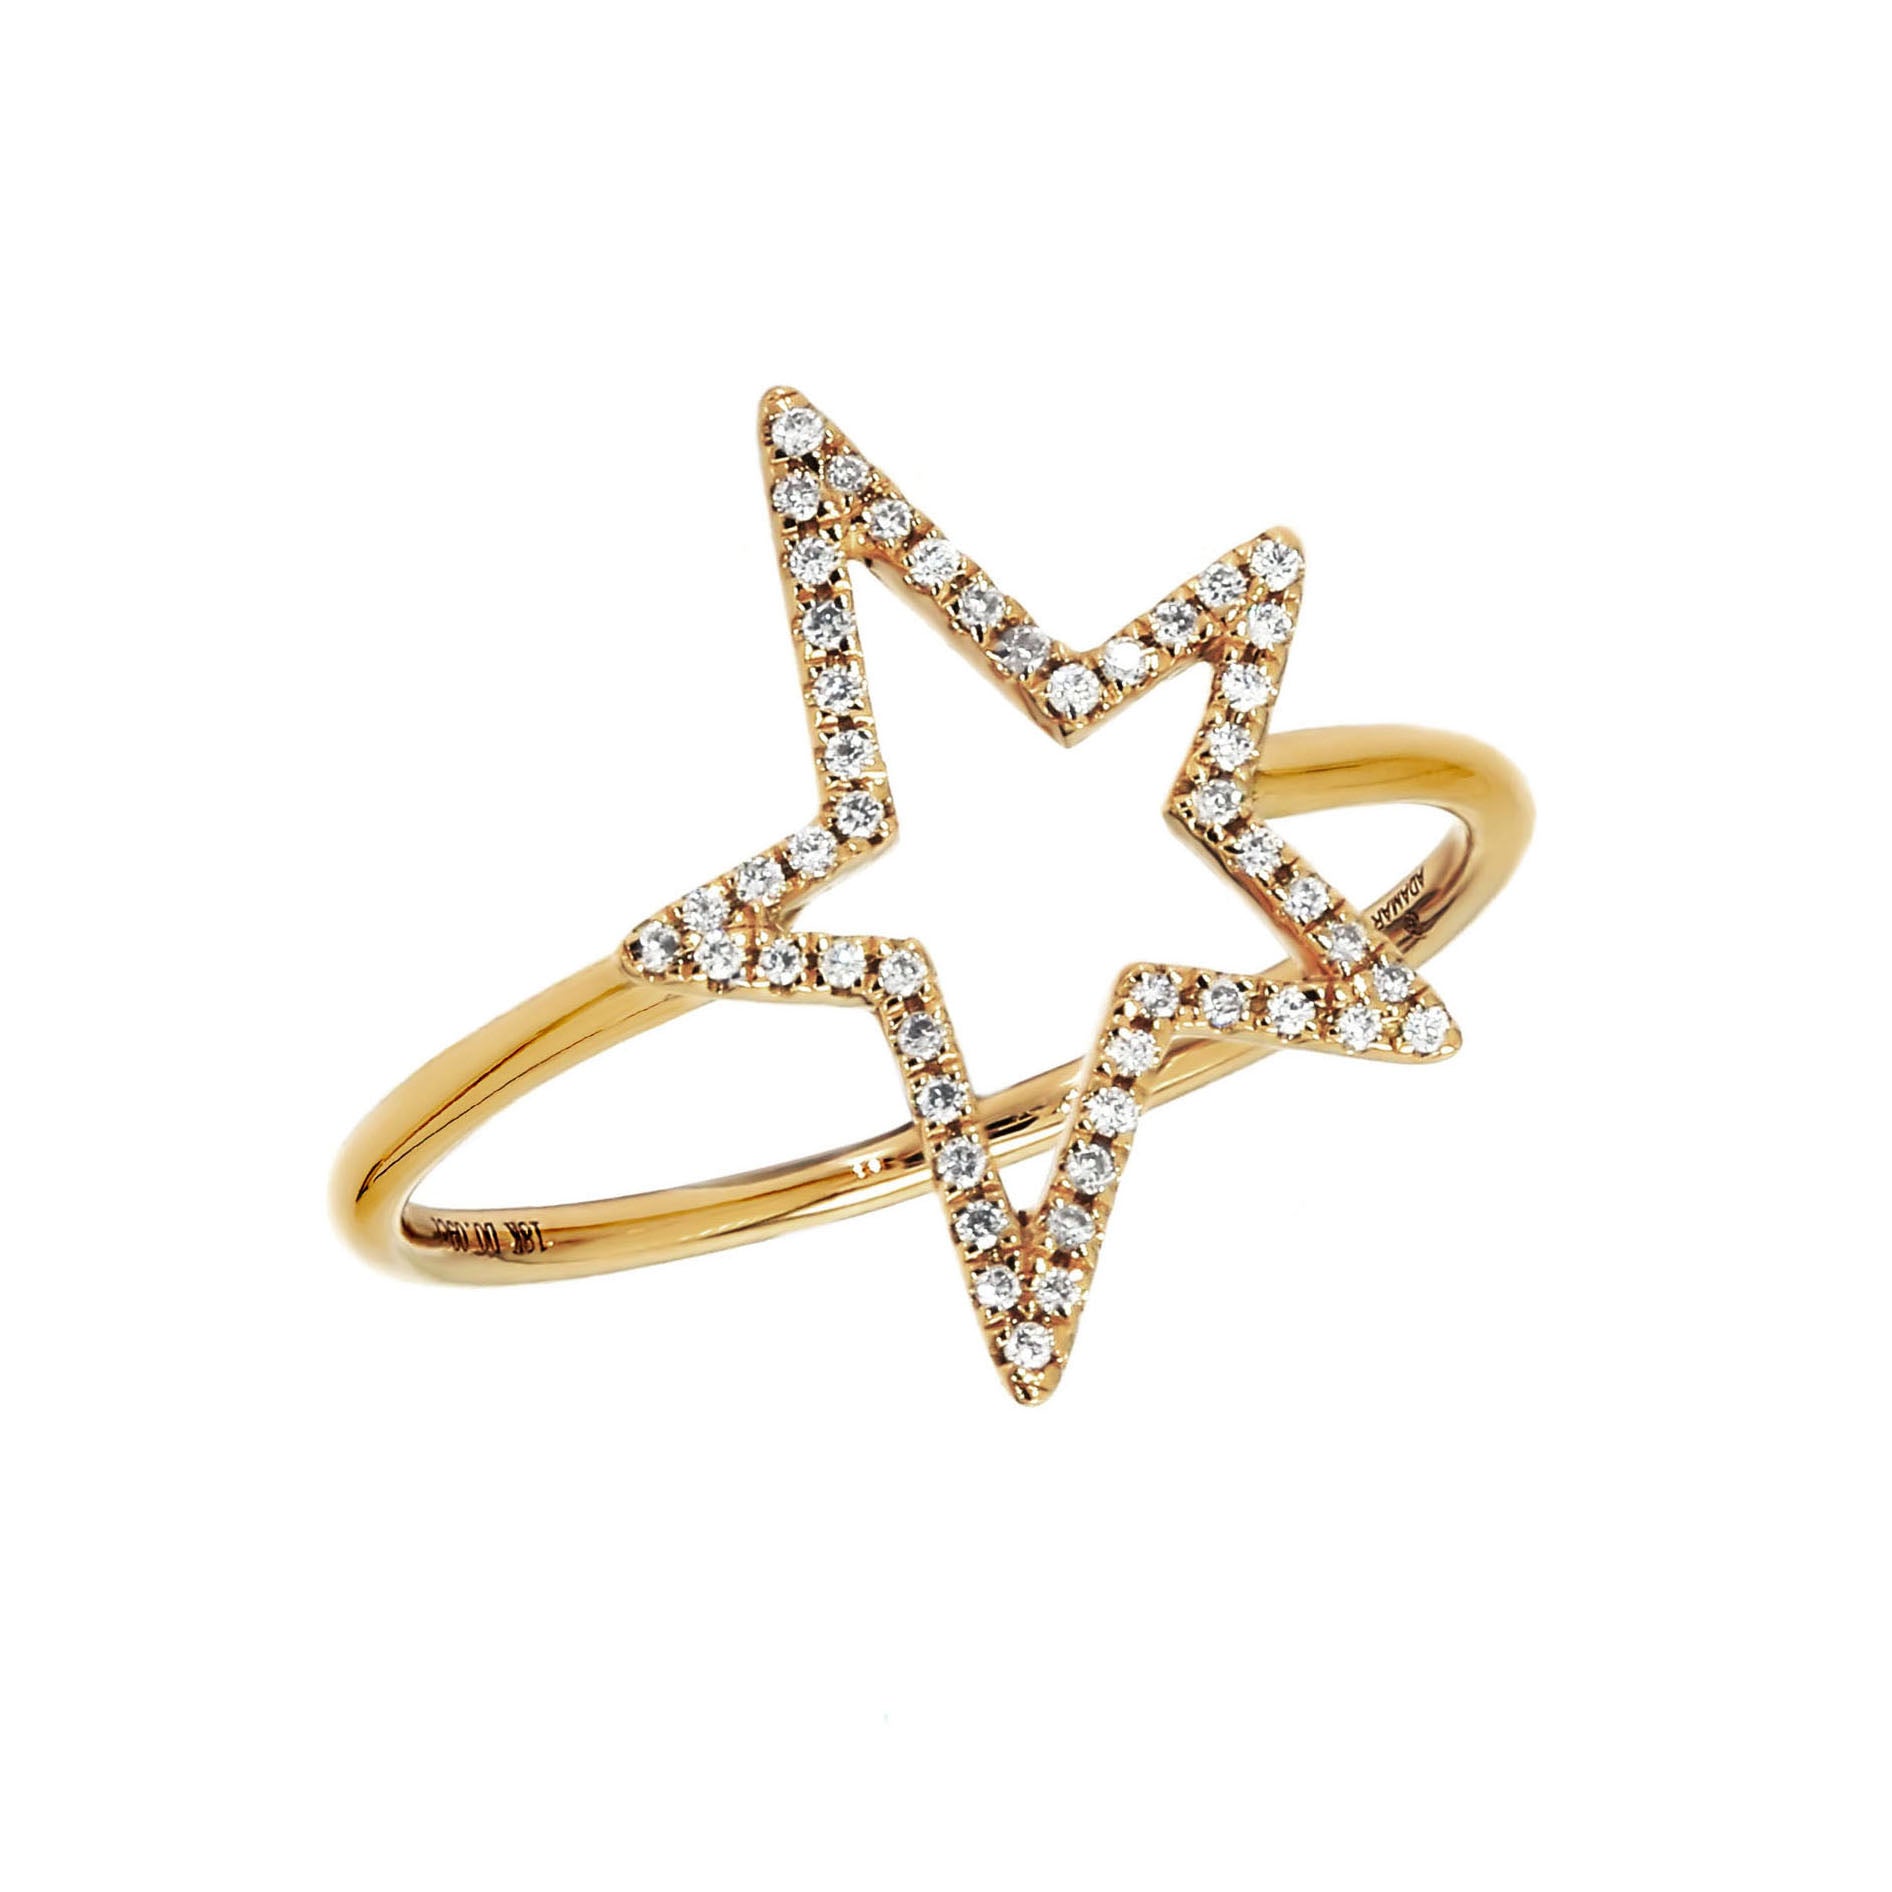 Adamar Jewels LUZ Mito Ring in 18K yellow gold set with diamonds